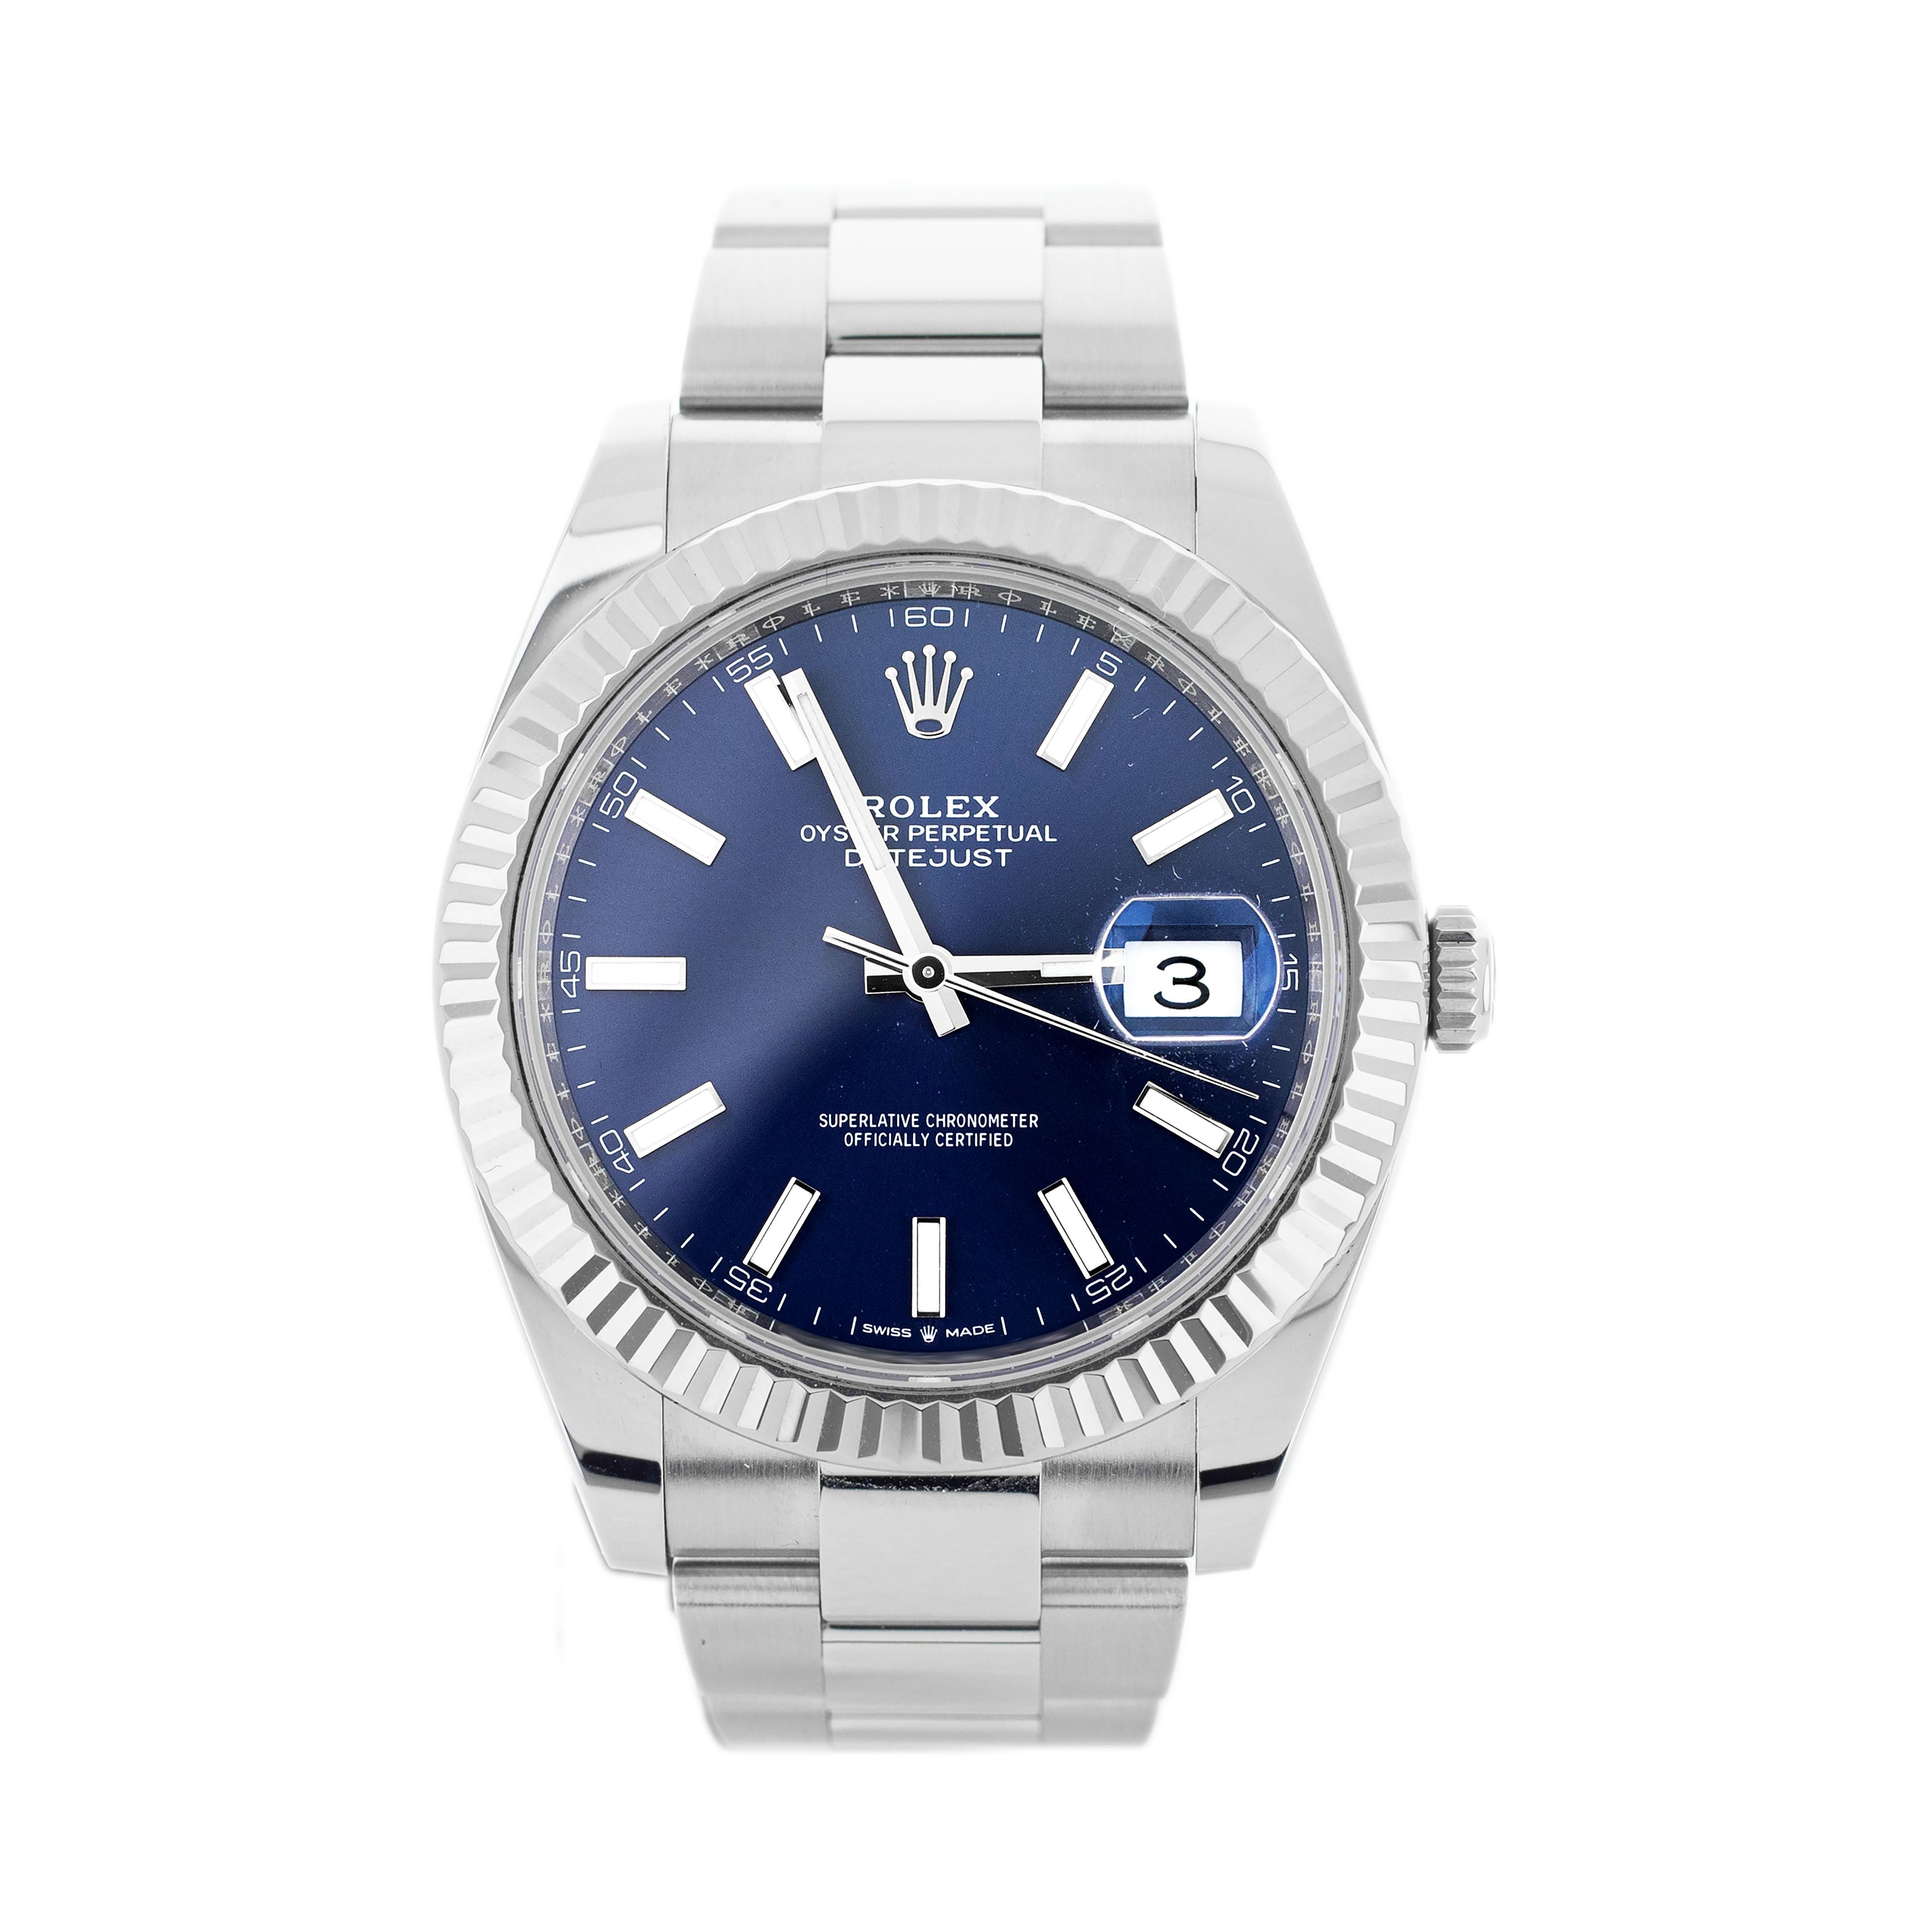 Rolex Datejust 41 Stainless Steel Blue Dial 41mm Oyster Bracelet Fluted 126334